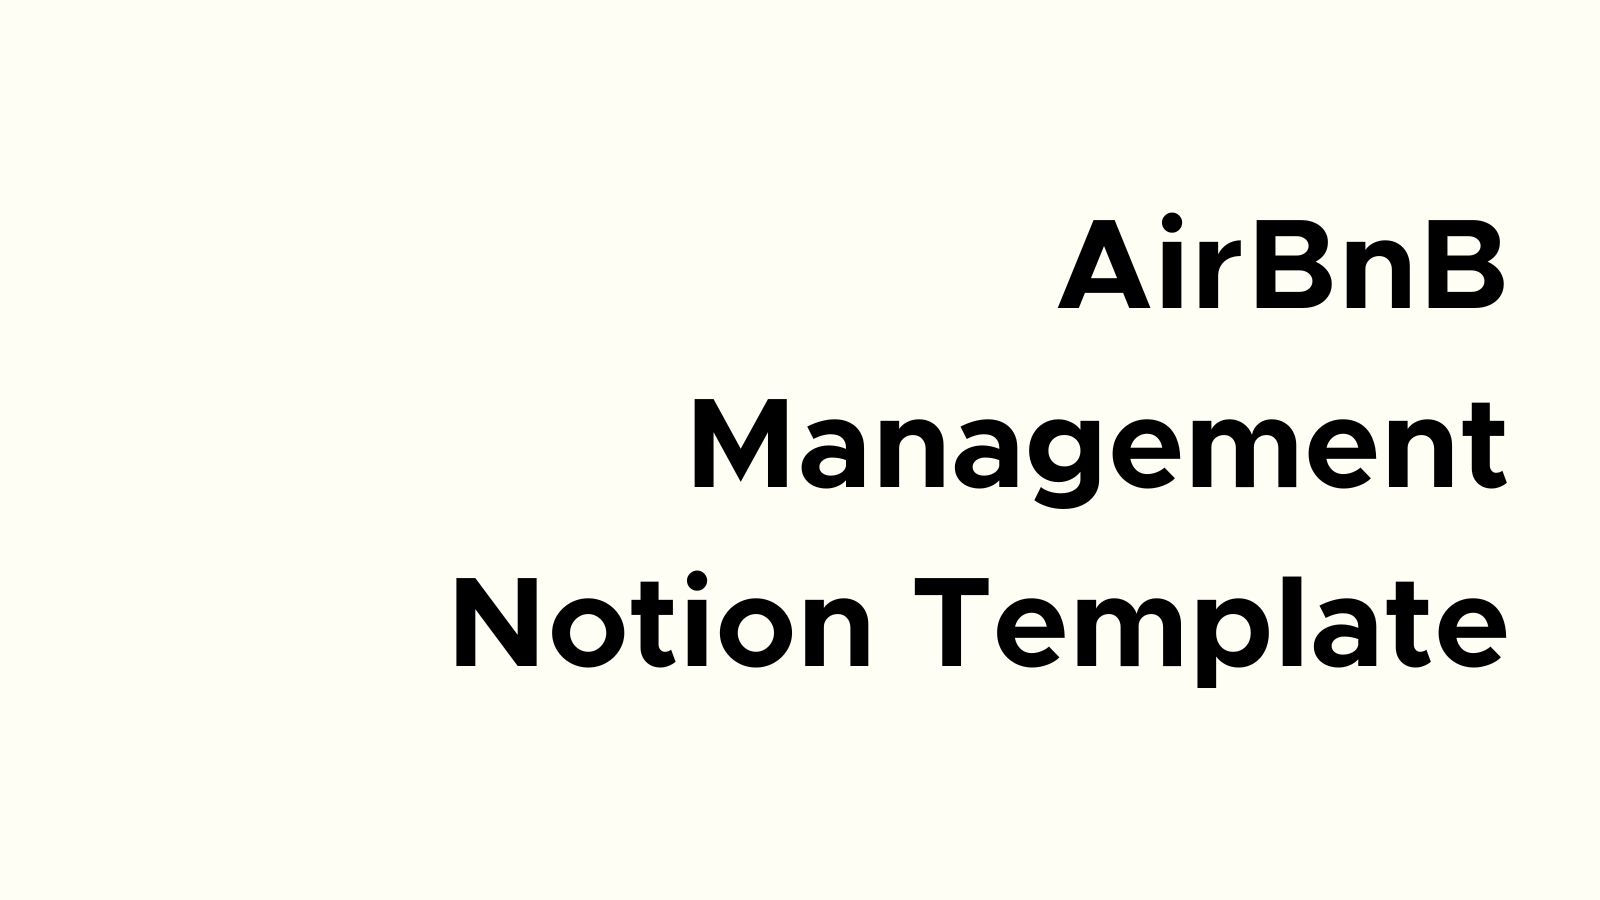 AirBnB Management Notion Template